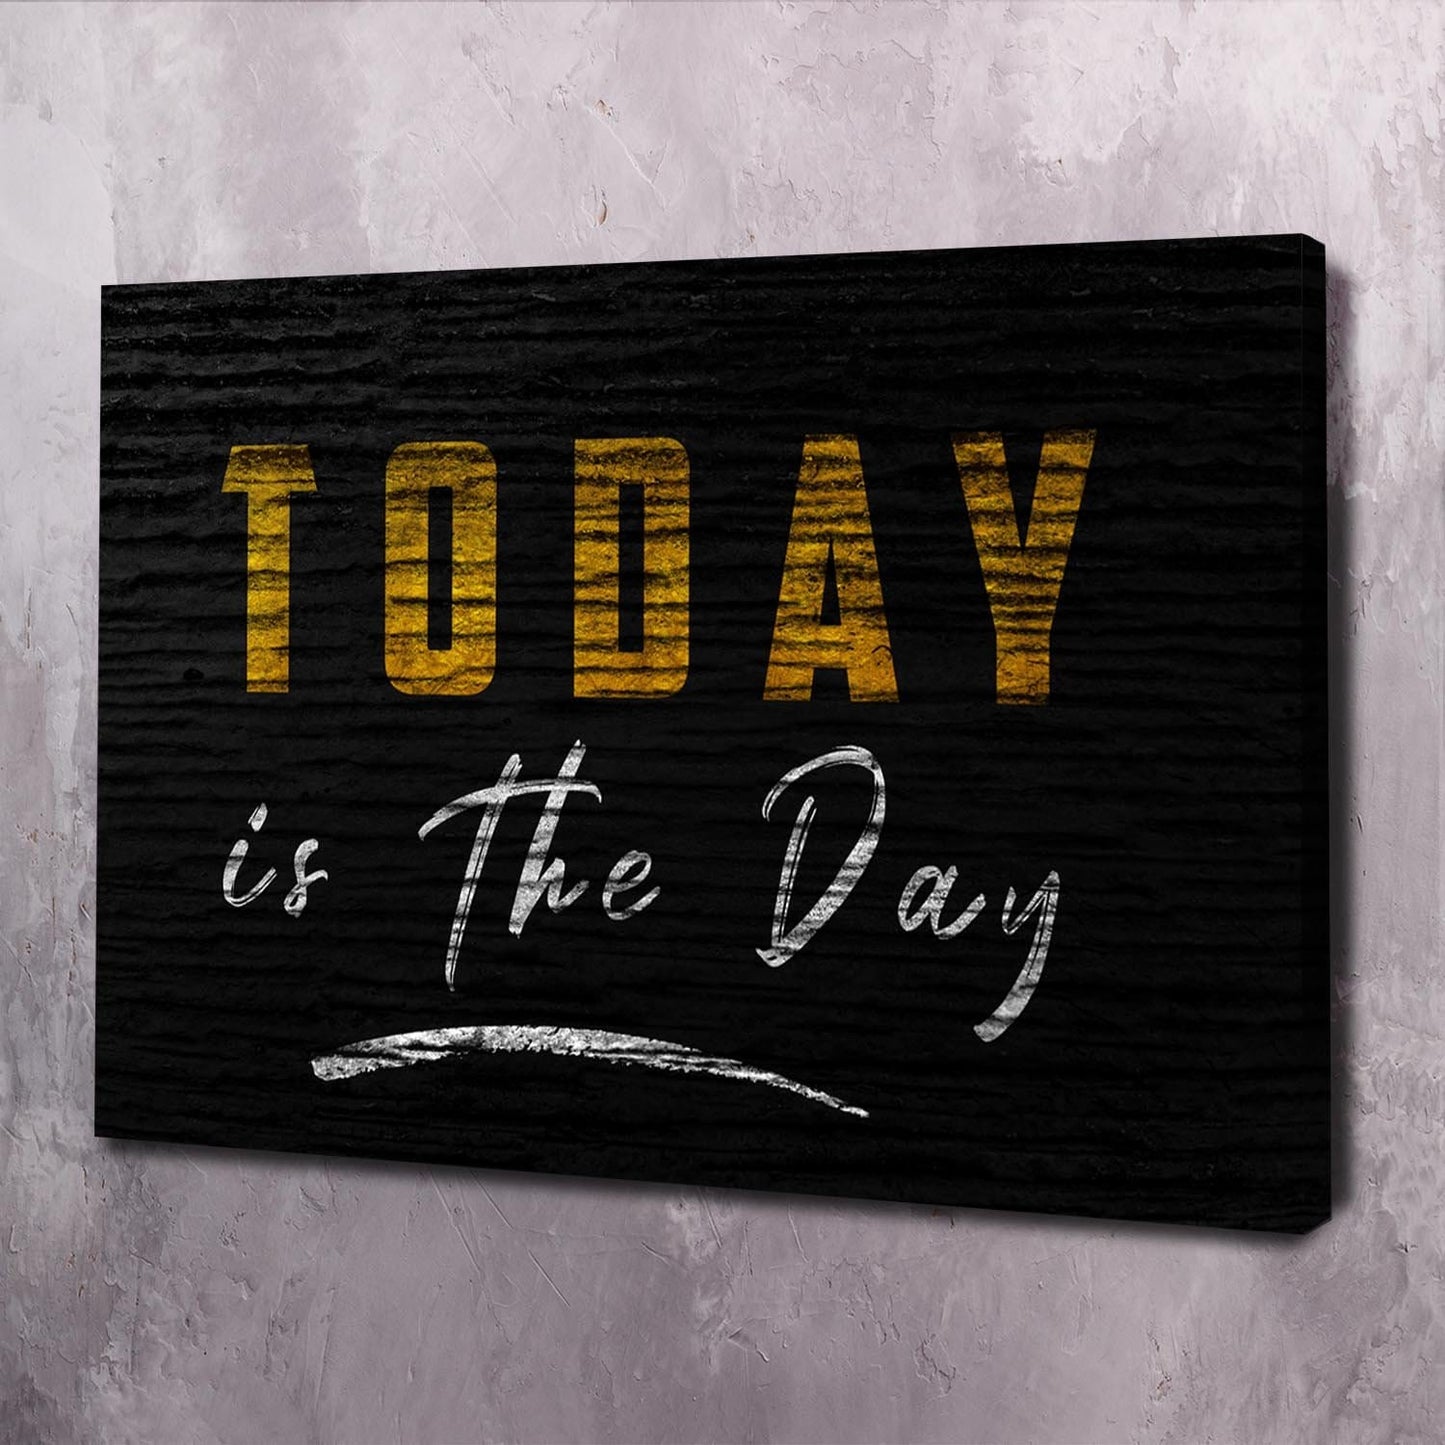 Today Is The Day Wall Art | Inspirational Wall Art Motivational Wall Art Quotes Office Art | ImpaktMaker Exclusive Canvas Art Landscape